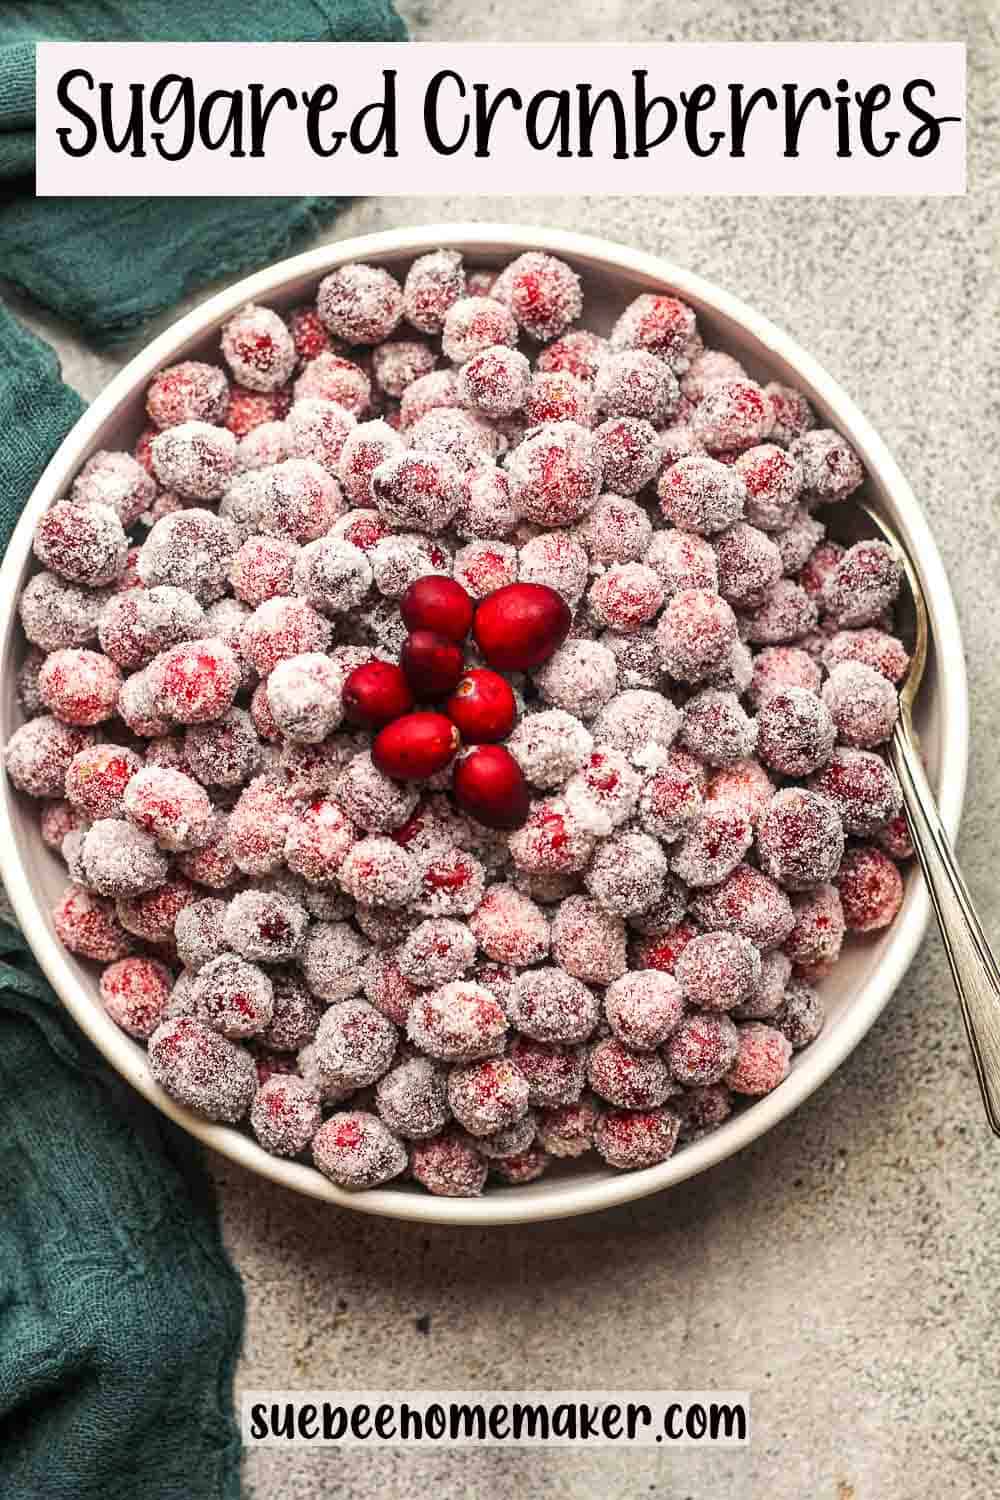 A bowl of sugared cranberries with a spoon.